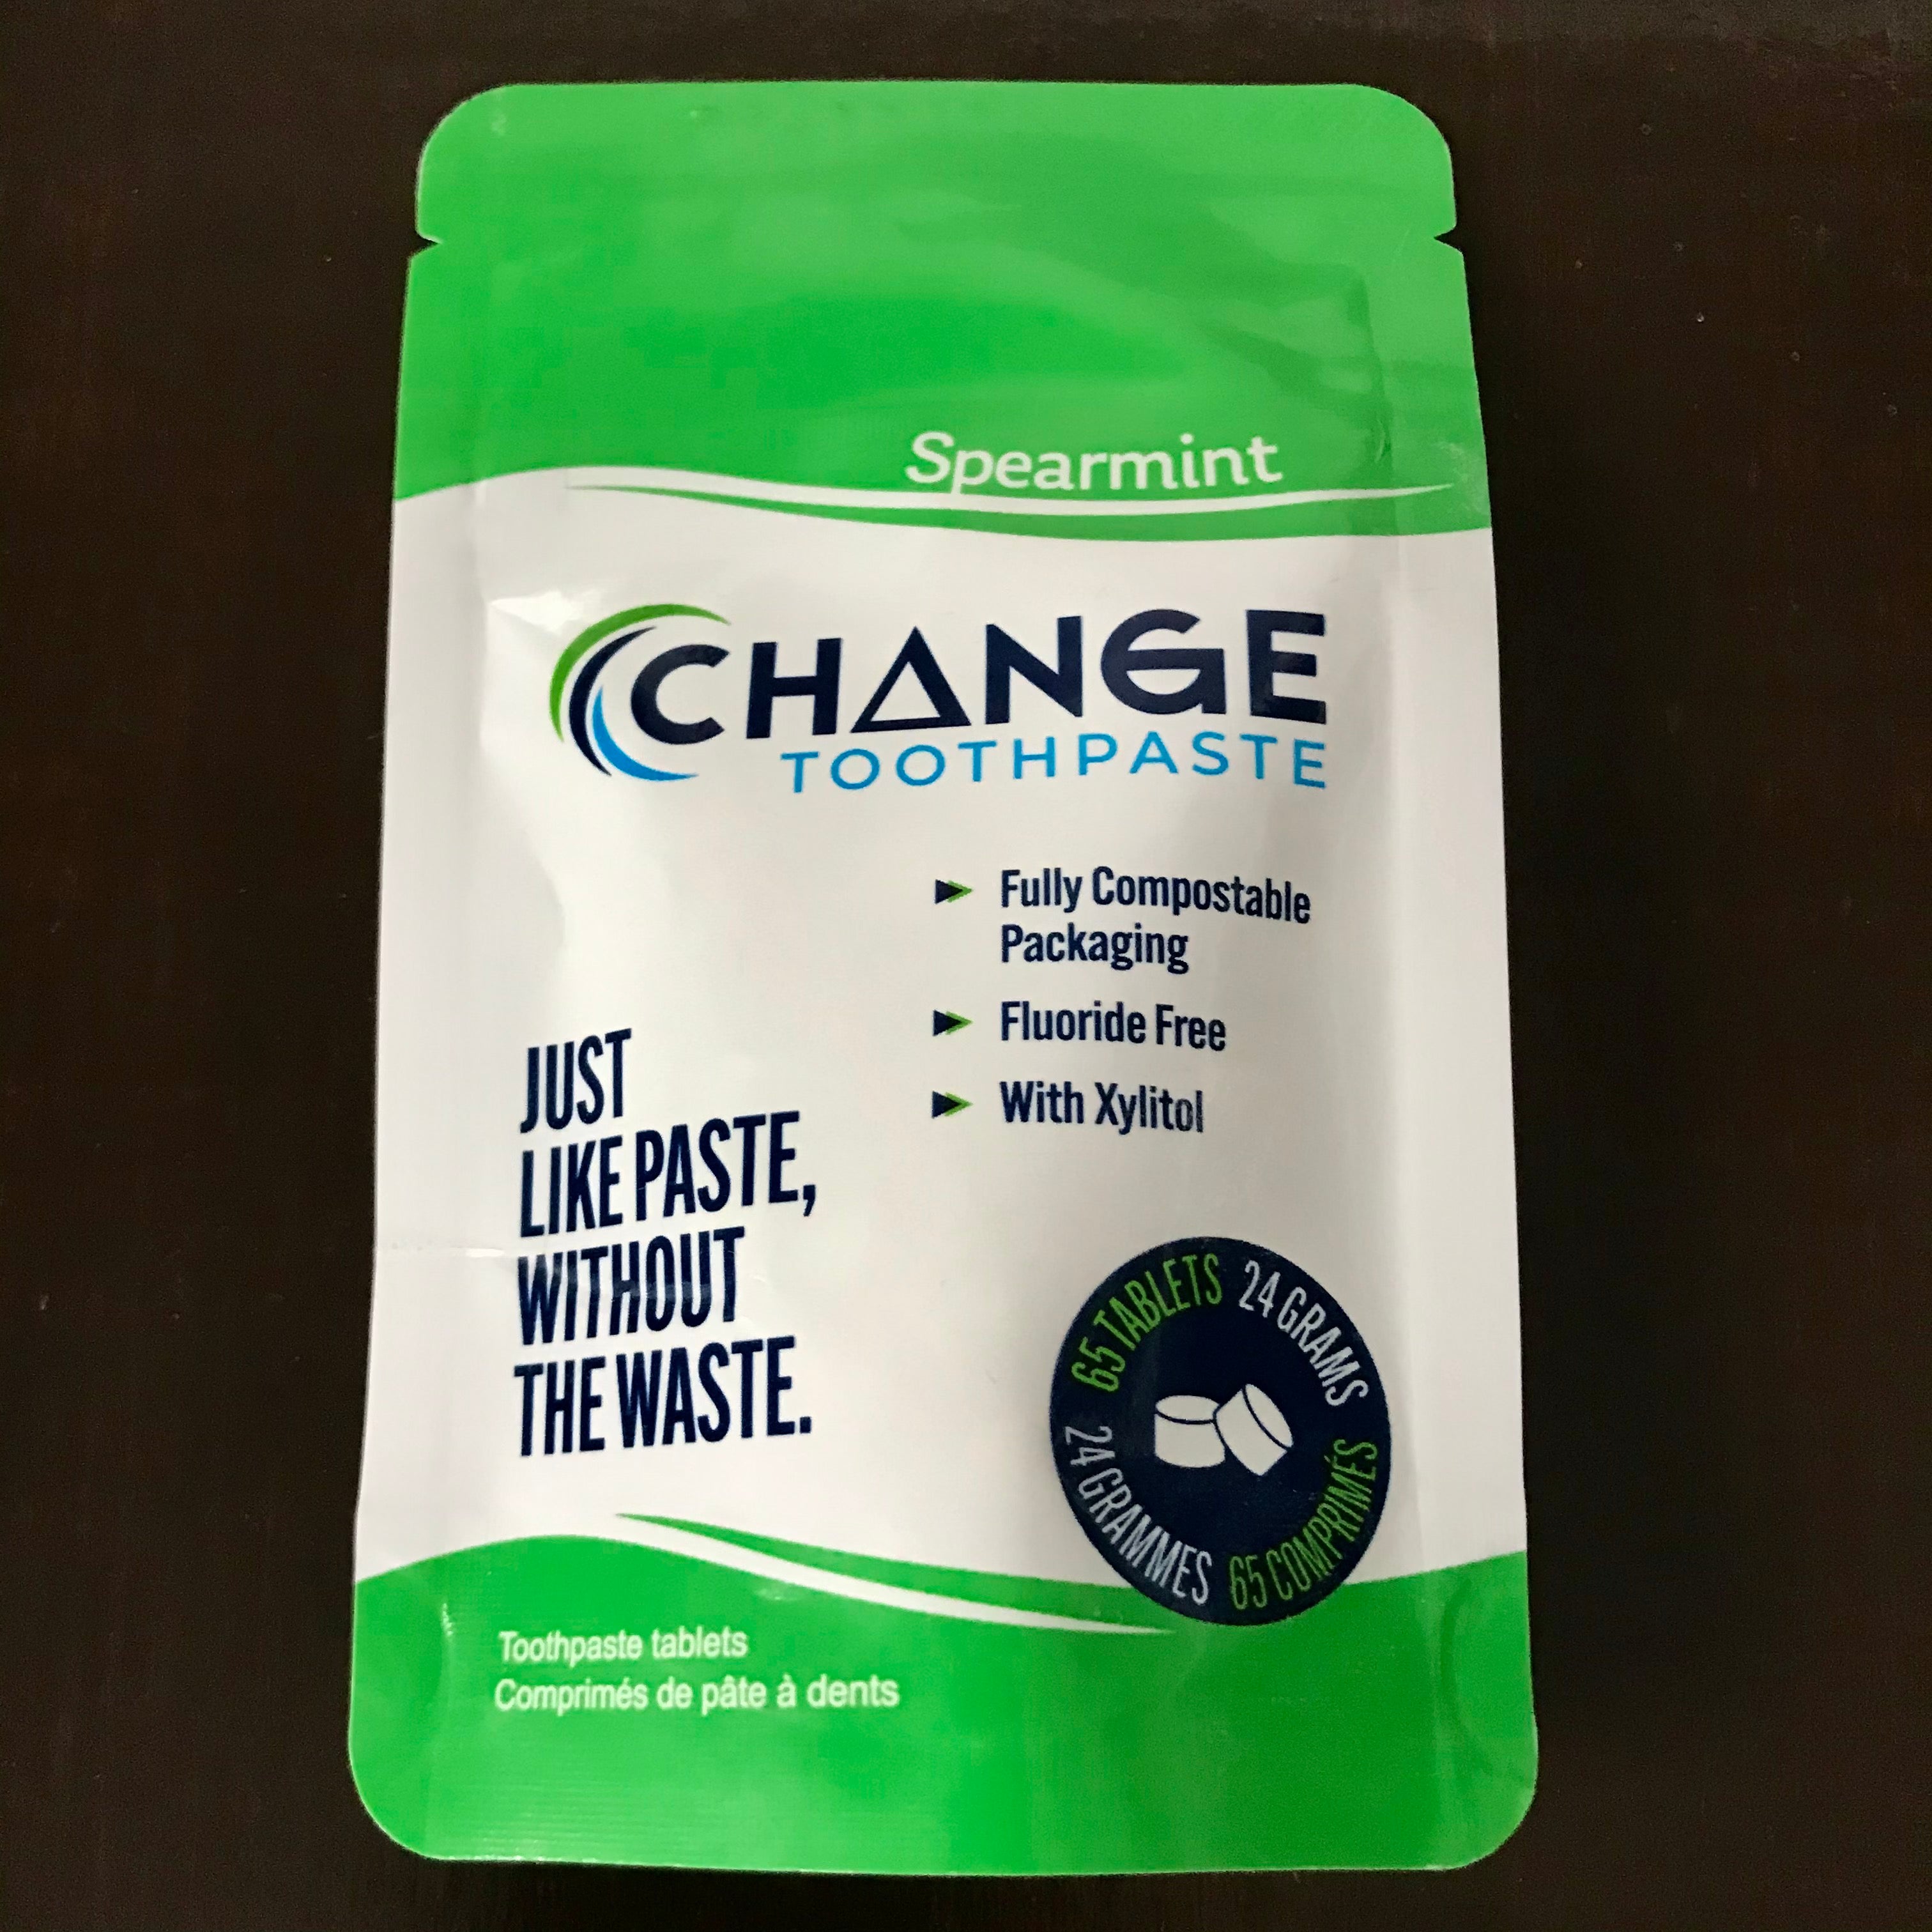 spearmint change toothpaste tablets 65 1 month supply compostable packaging made in canada